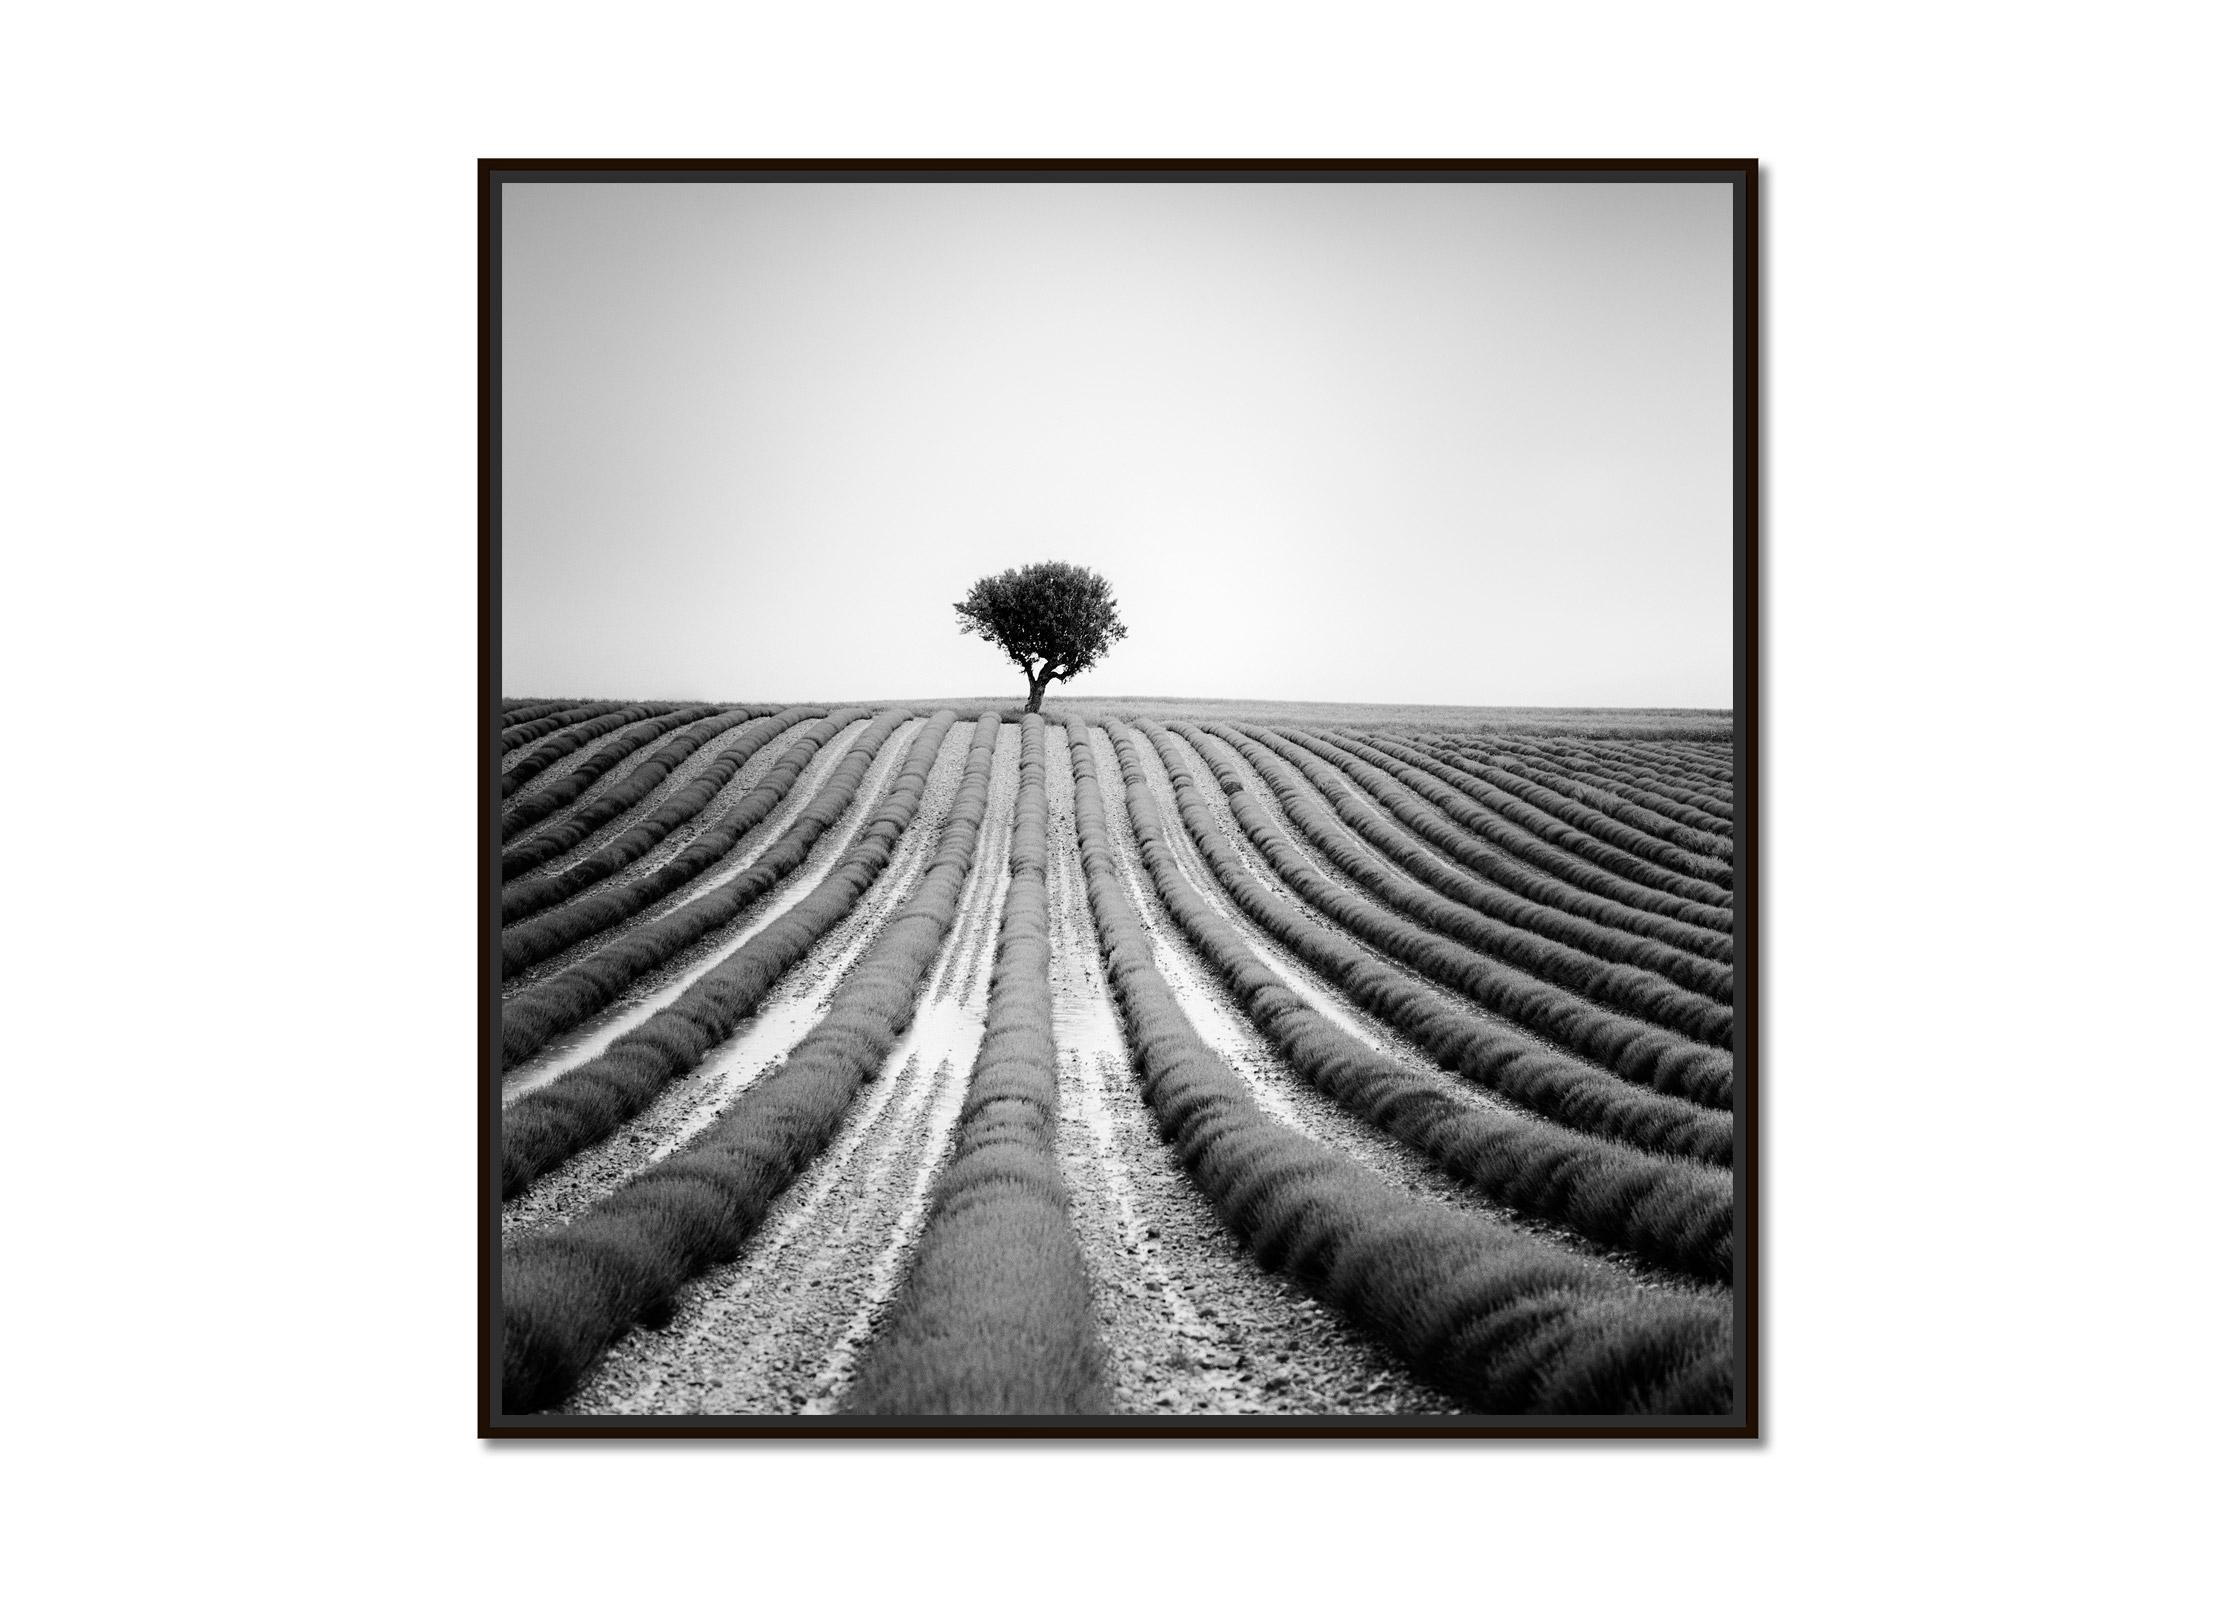 Lonely Tree in Lavender, Provence, France, black and white landscape photography - Photograph by Gerald Berghammer